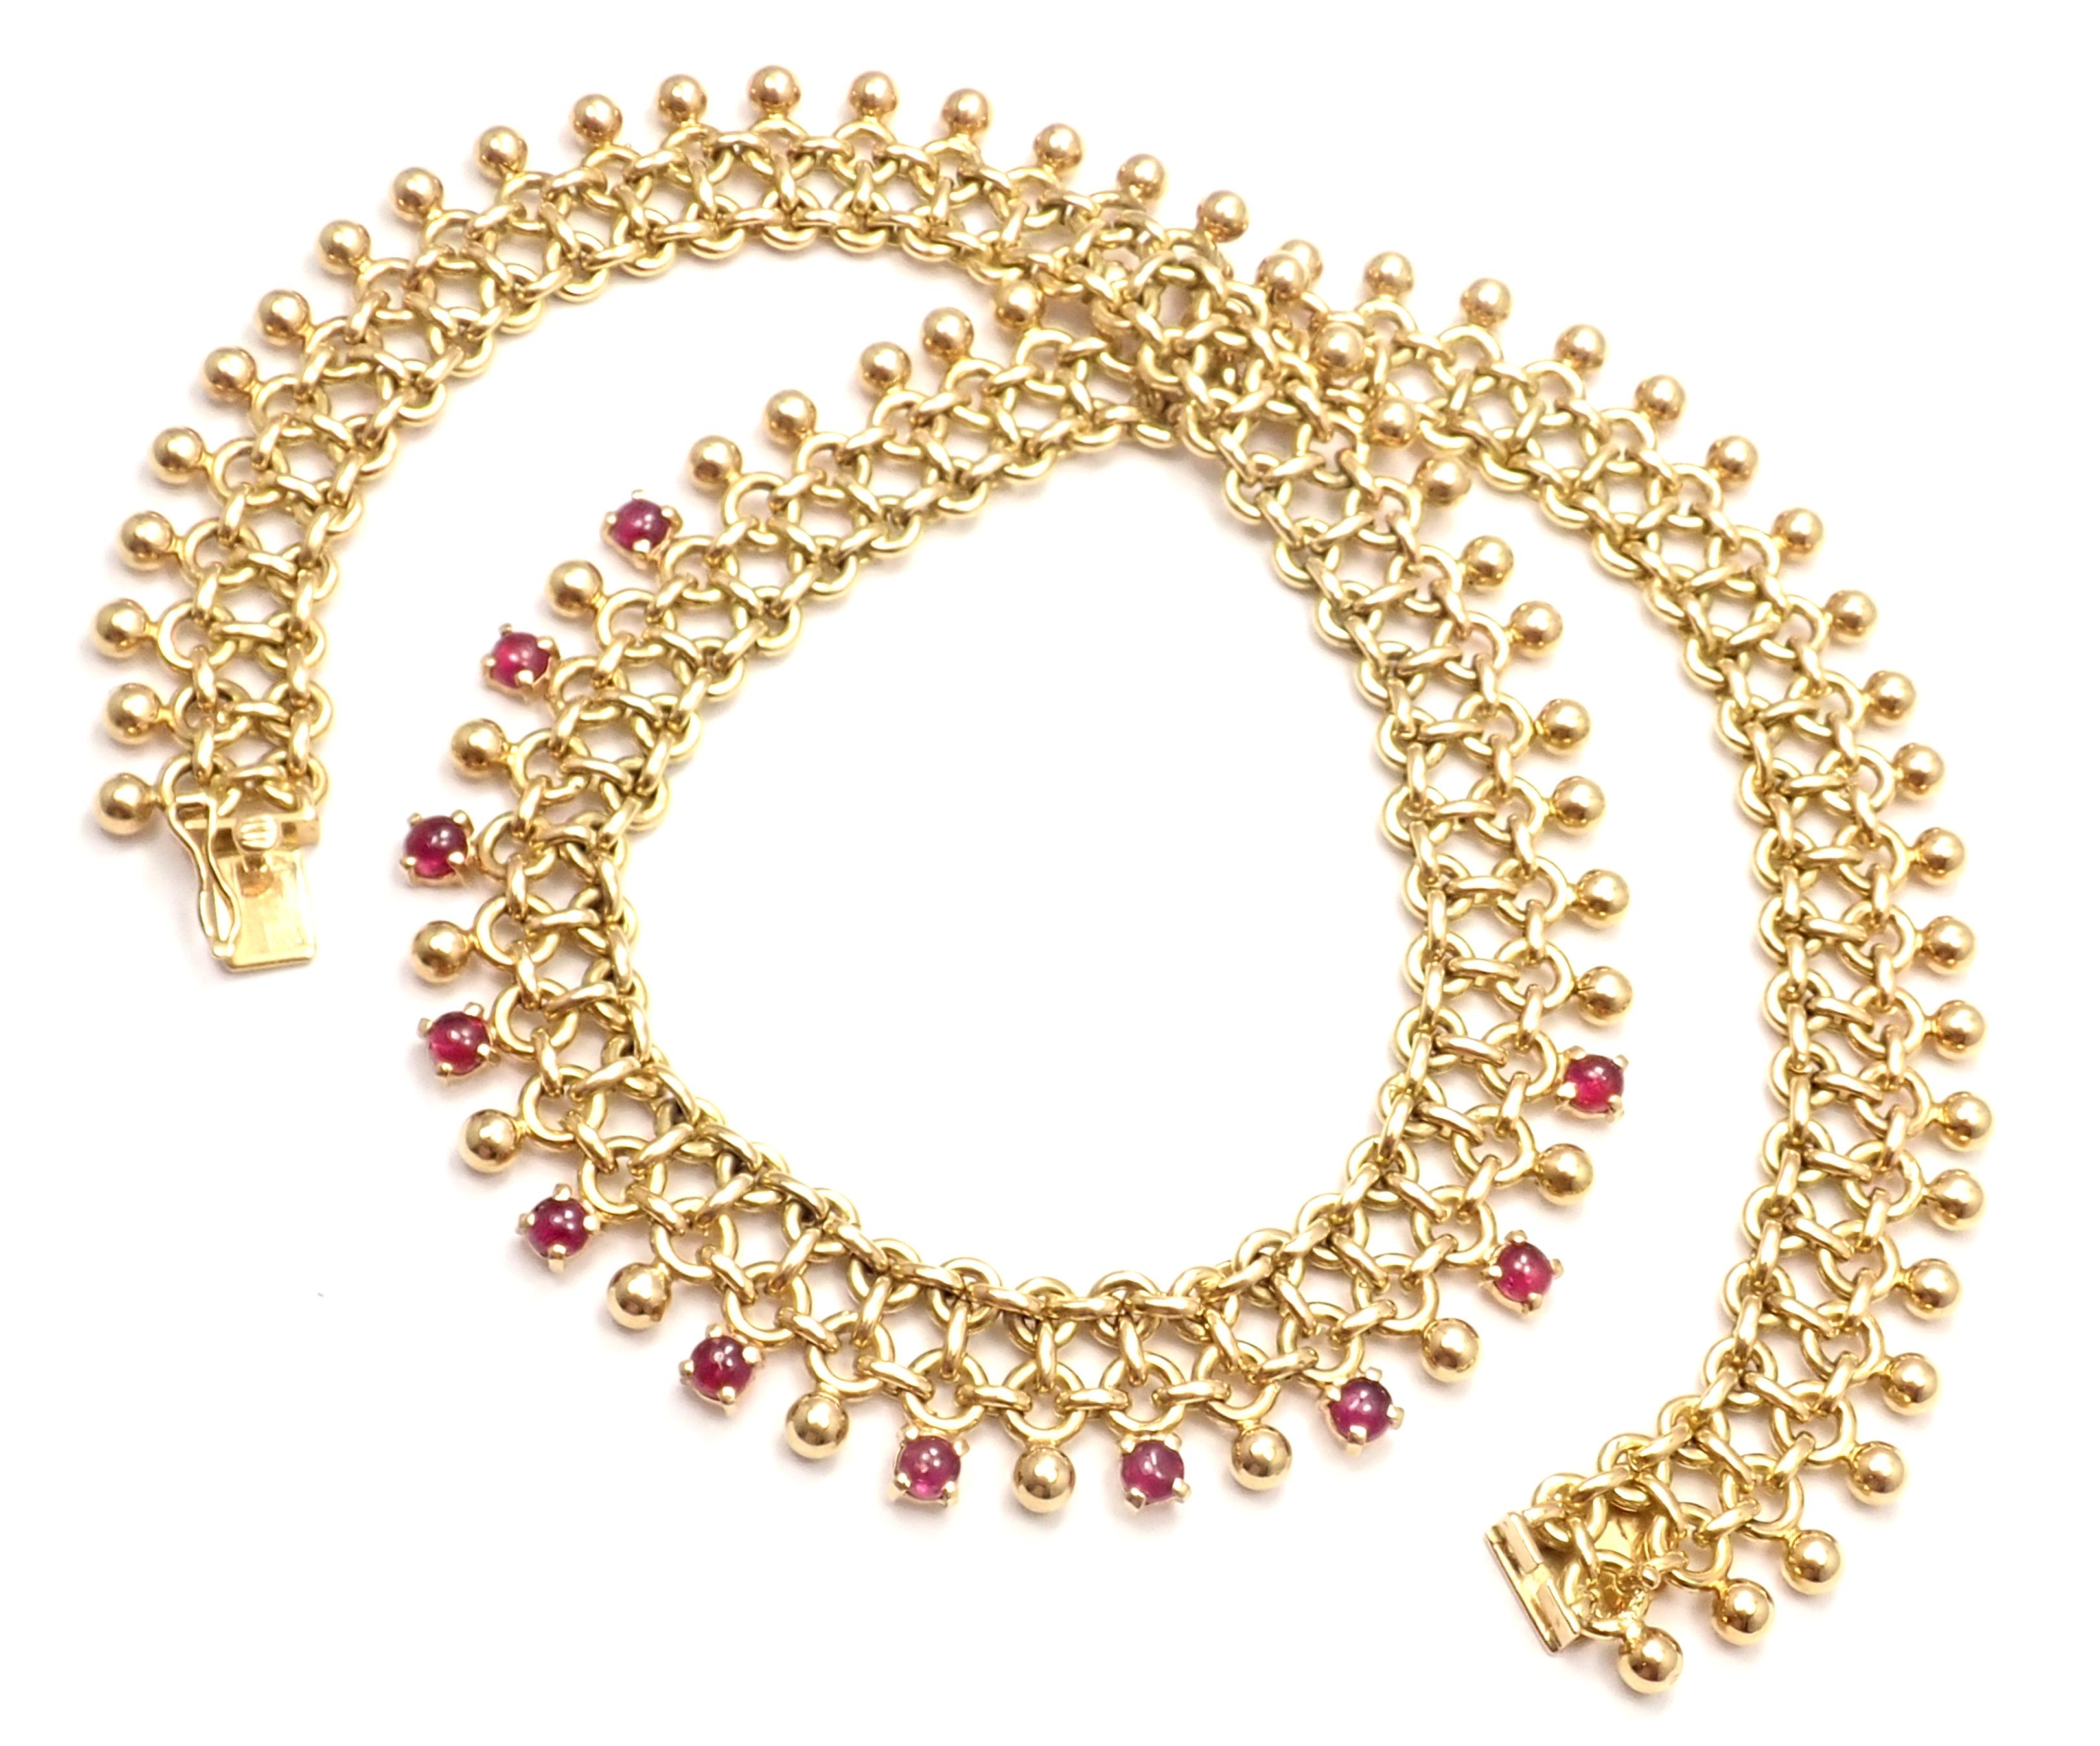 18k Yellow Gold Vintage Ruby Collar Necklace by Tiffany Co.
With 11 round rubies total weight approximately 5ct
Details: 
Length: 16